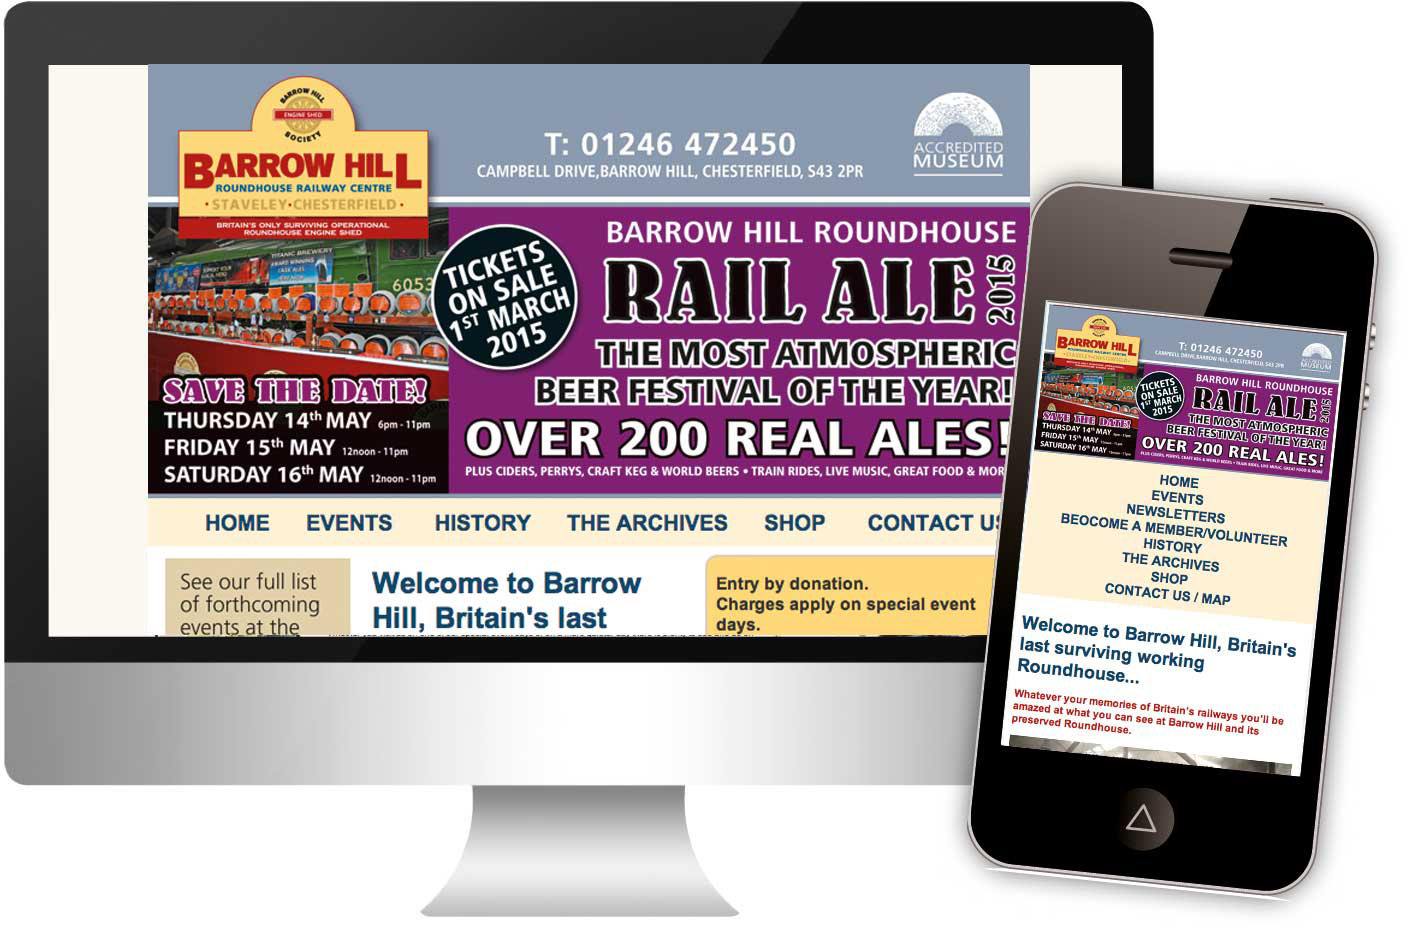 Barrow Hill Museum website, launched in January 2015, responsive web design.